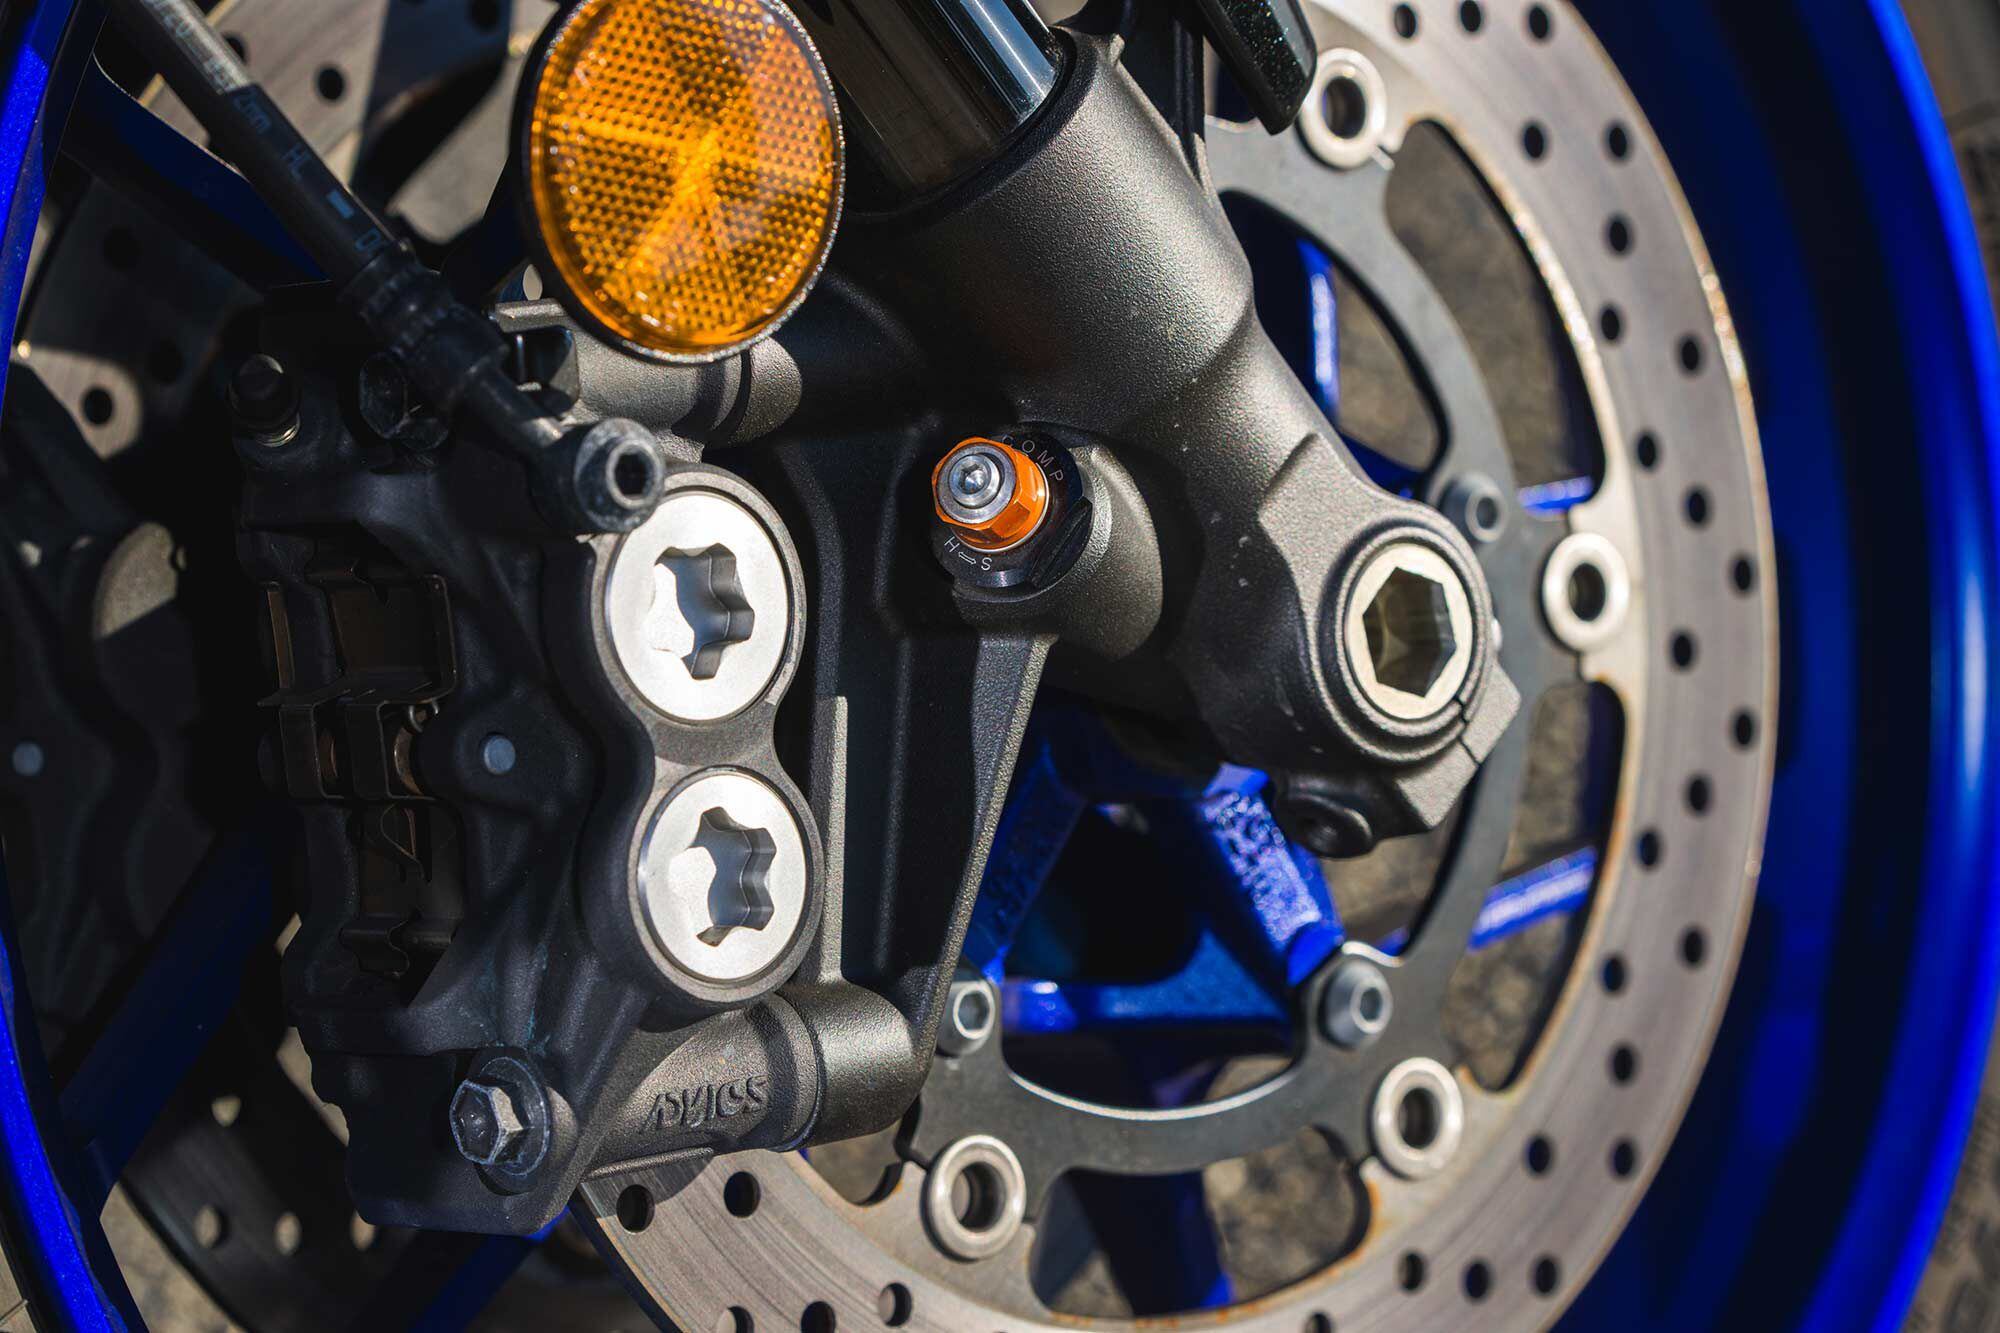 The MT-09 SP is adorned with a KYB fork adjustable for high- and low-speed compression damping.